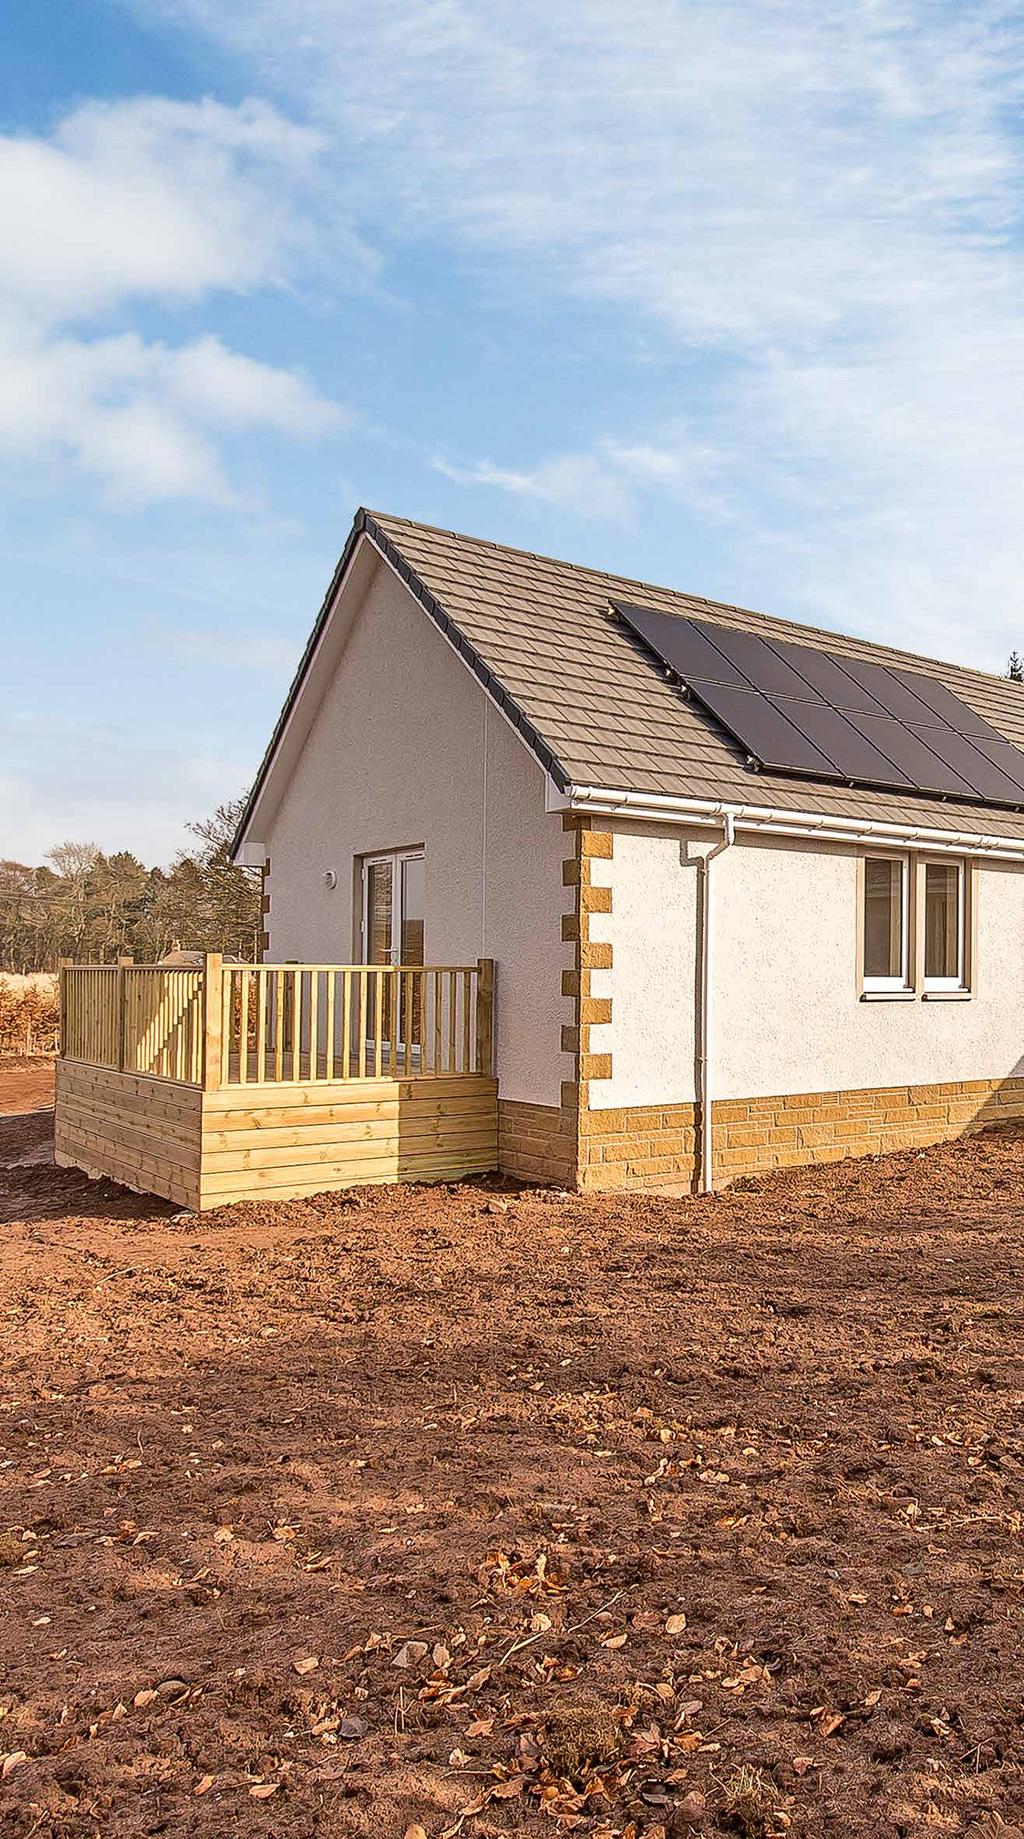 Strawberry Fields Lintrose, Campmuir, PH13 9LJ A stunning, executive style new build detached bungalow situated in a prime Perthshire location.